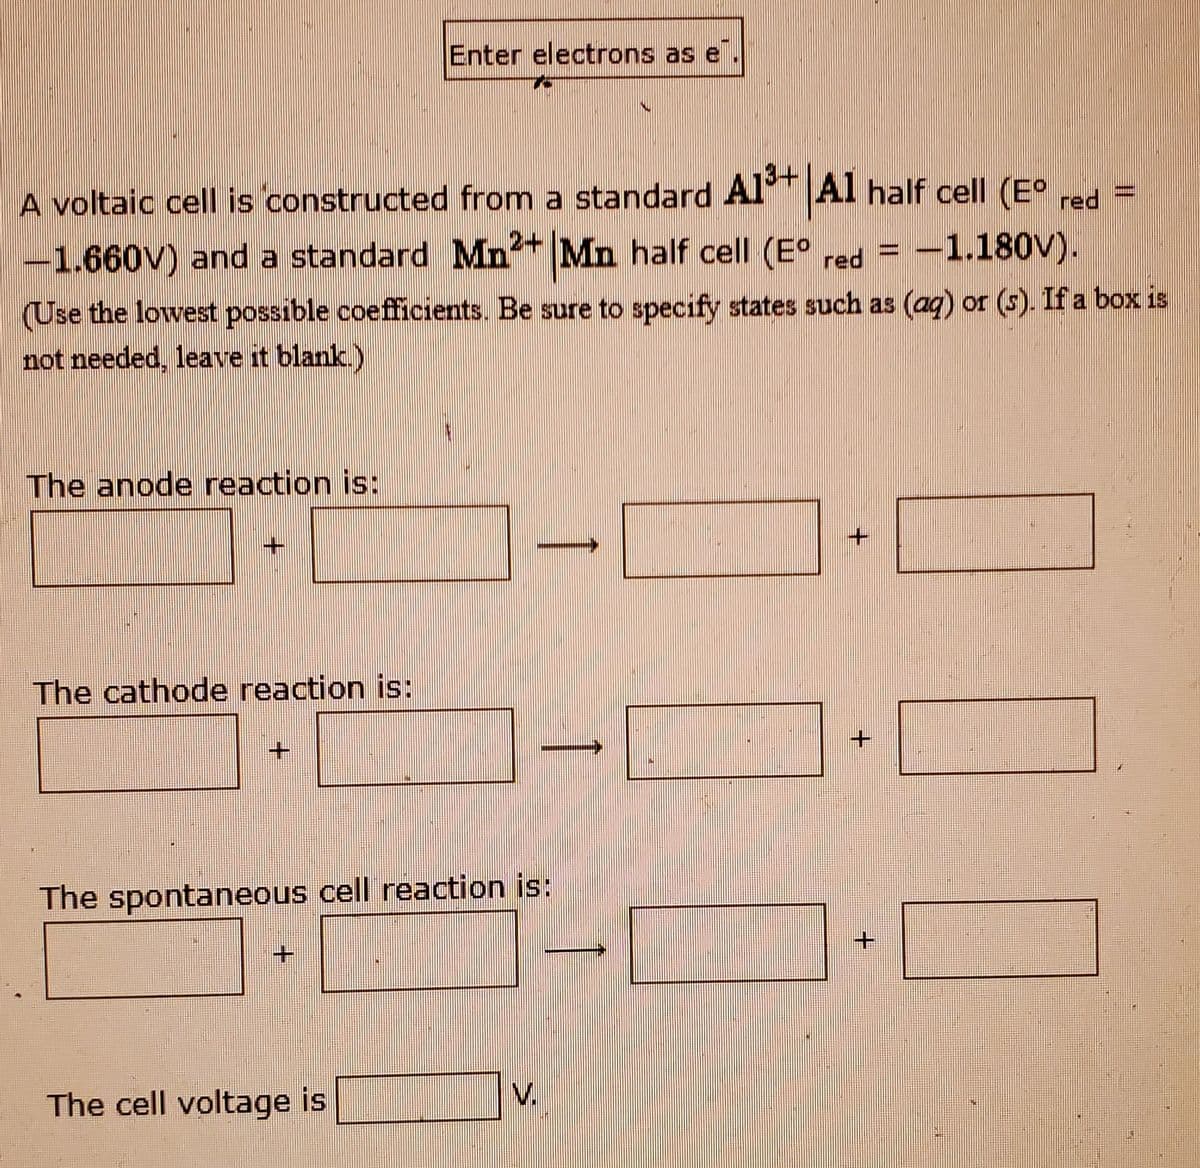 Enter electrons as e
A voltaic cell is constructed from a standard Al Al half cell (E° =
2+
red
1.660V) and a standard Mn* Mn half cell (E° red
= -1.180V).
(Use the lowest possible coefficients. Be sure to specify states such as (aq) or (s). If a box is
not needed, leave it blank.)
The anode reaction is:
The cathode reaction is:
The spontaneous cell reaction is:
The cell voltage is
V.
